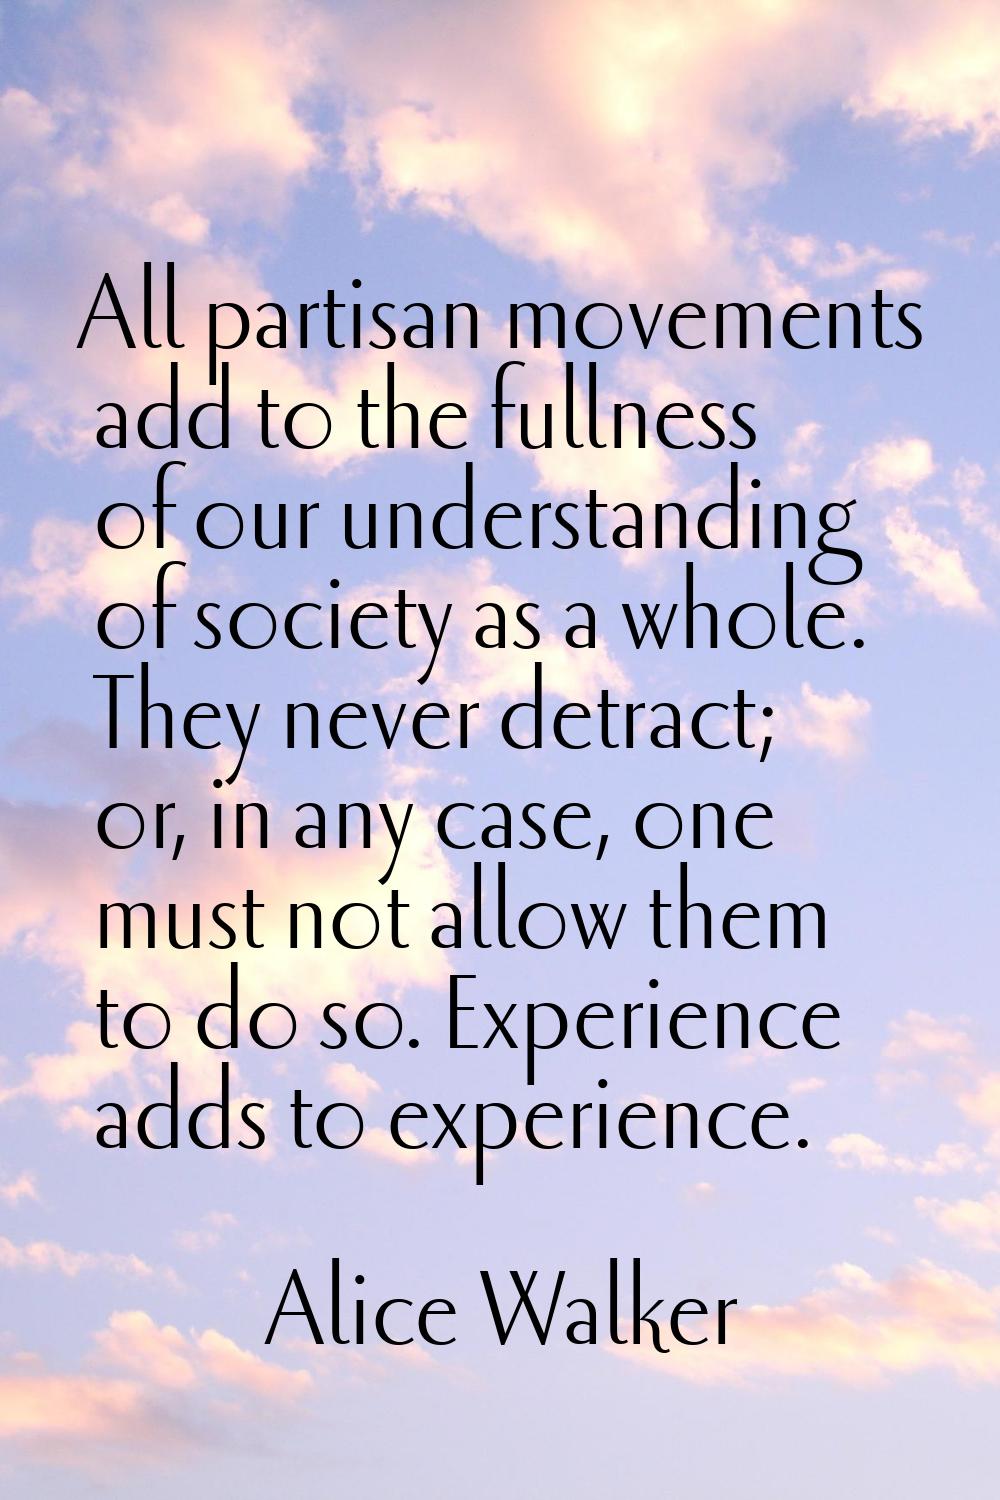 All partisan movements add to the fullness of our understanding of society as a whole. They never d